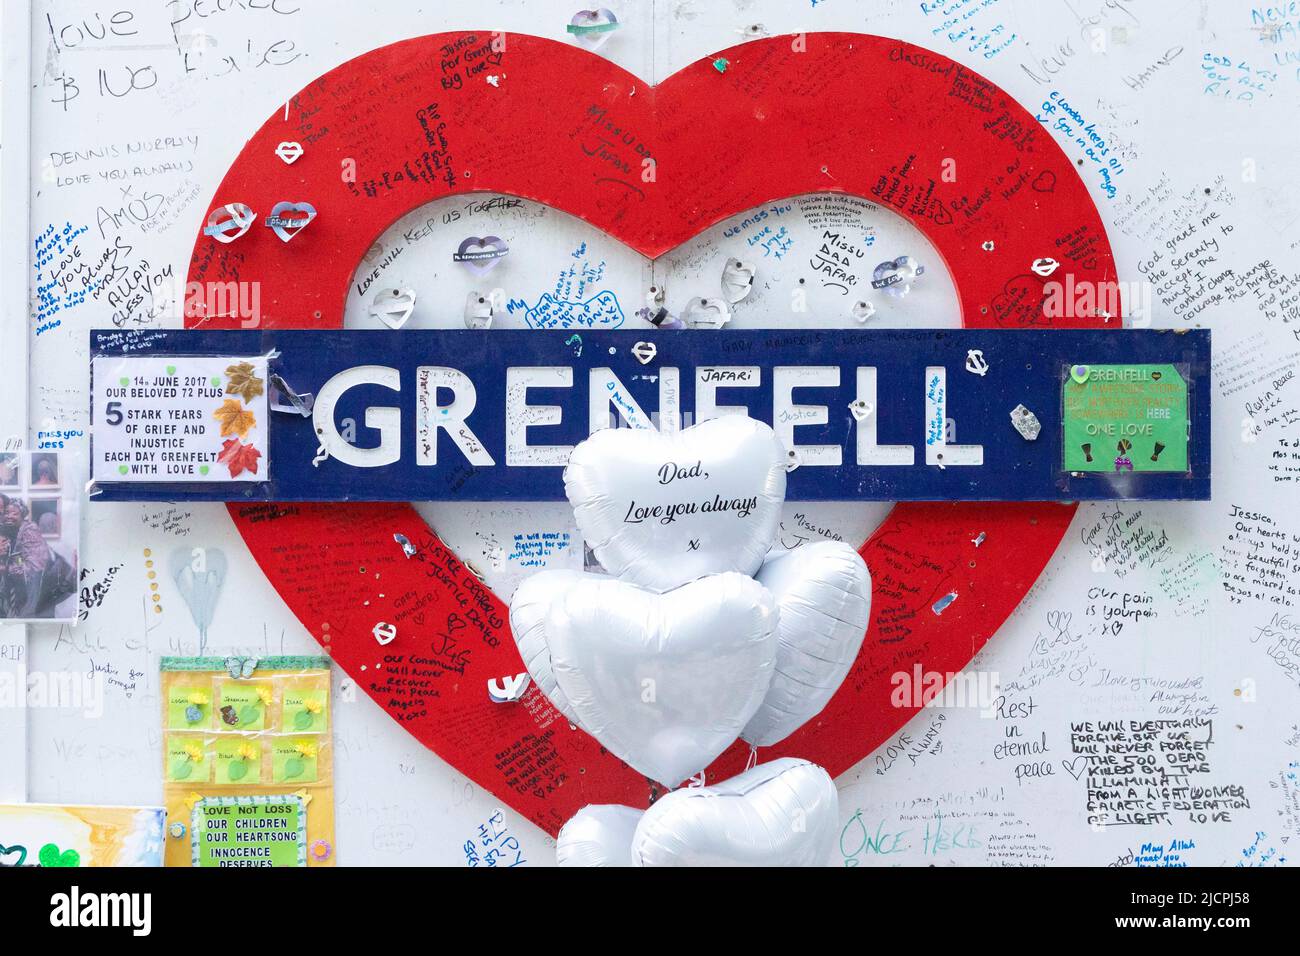 A memorial service is held at Grenfell Tower to commemorate the 5th Anniversary of the Grenfell Fire.  Image shot on 14th June 2022.  © Belinda Jiao Stock Photo